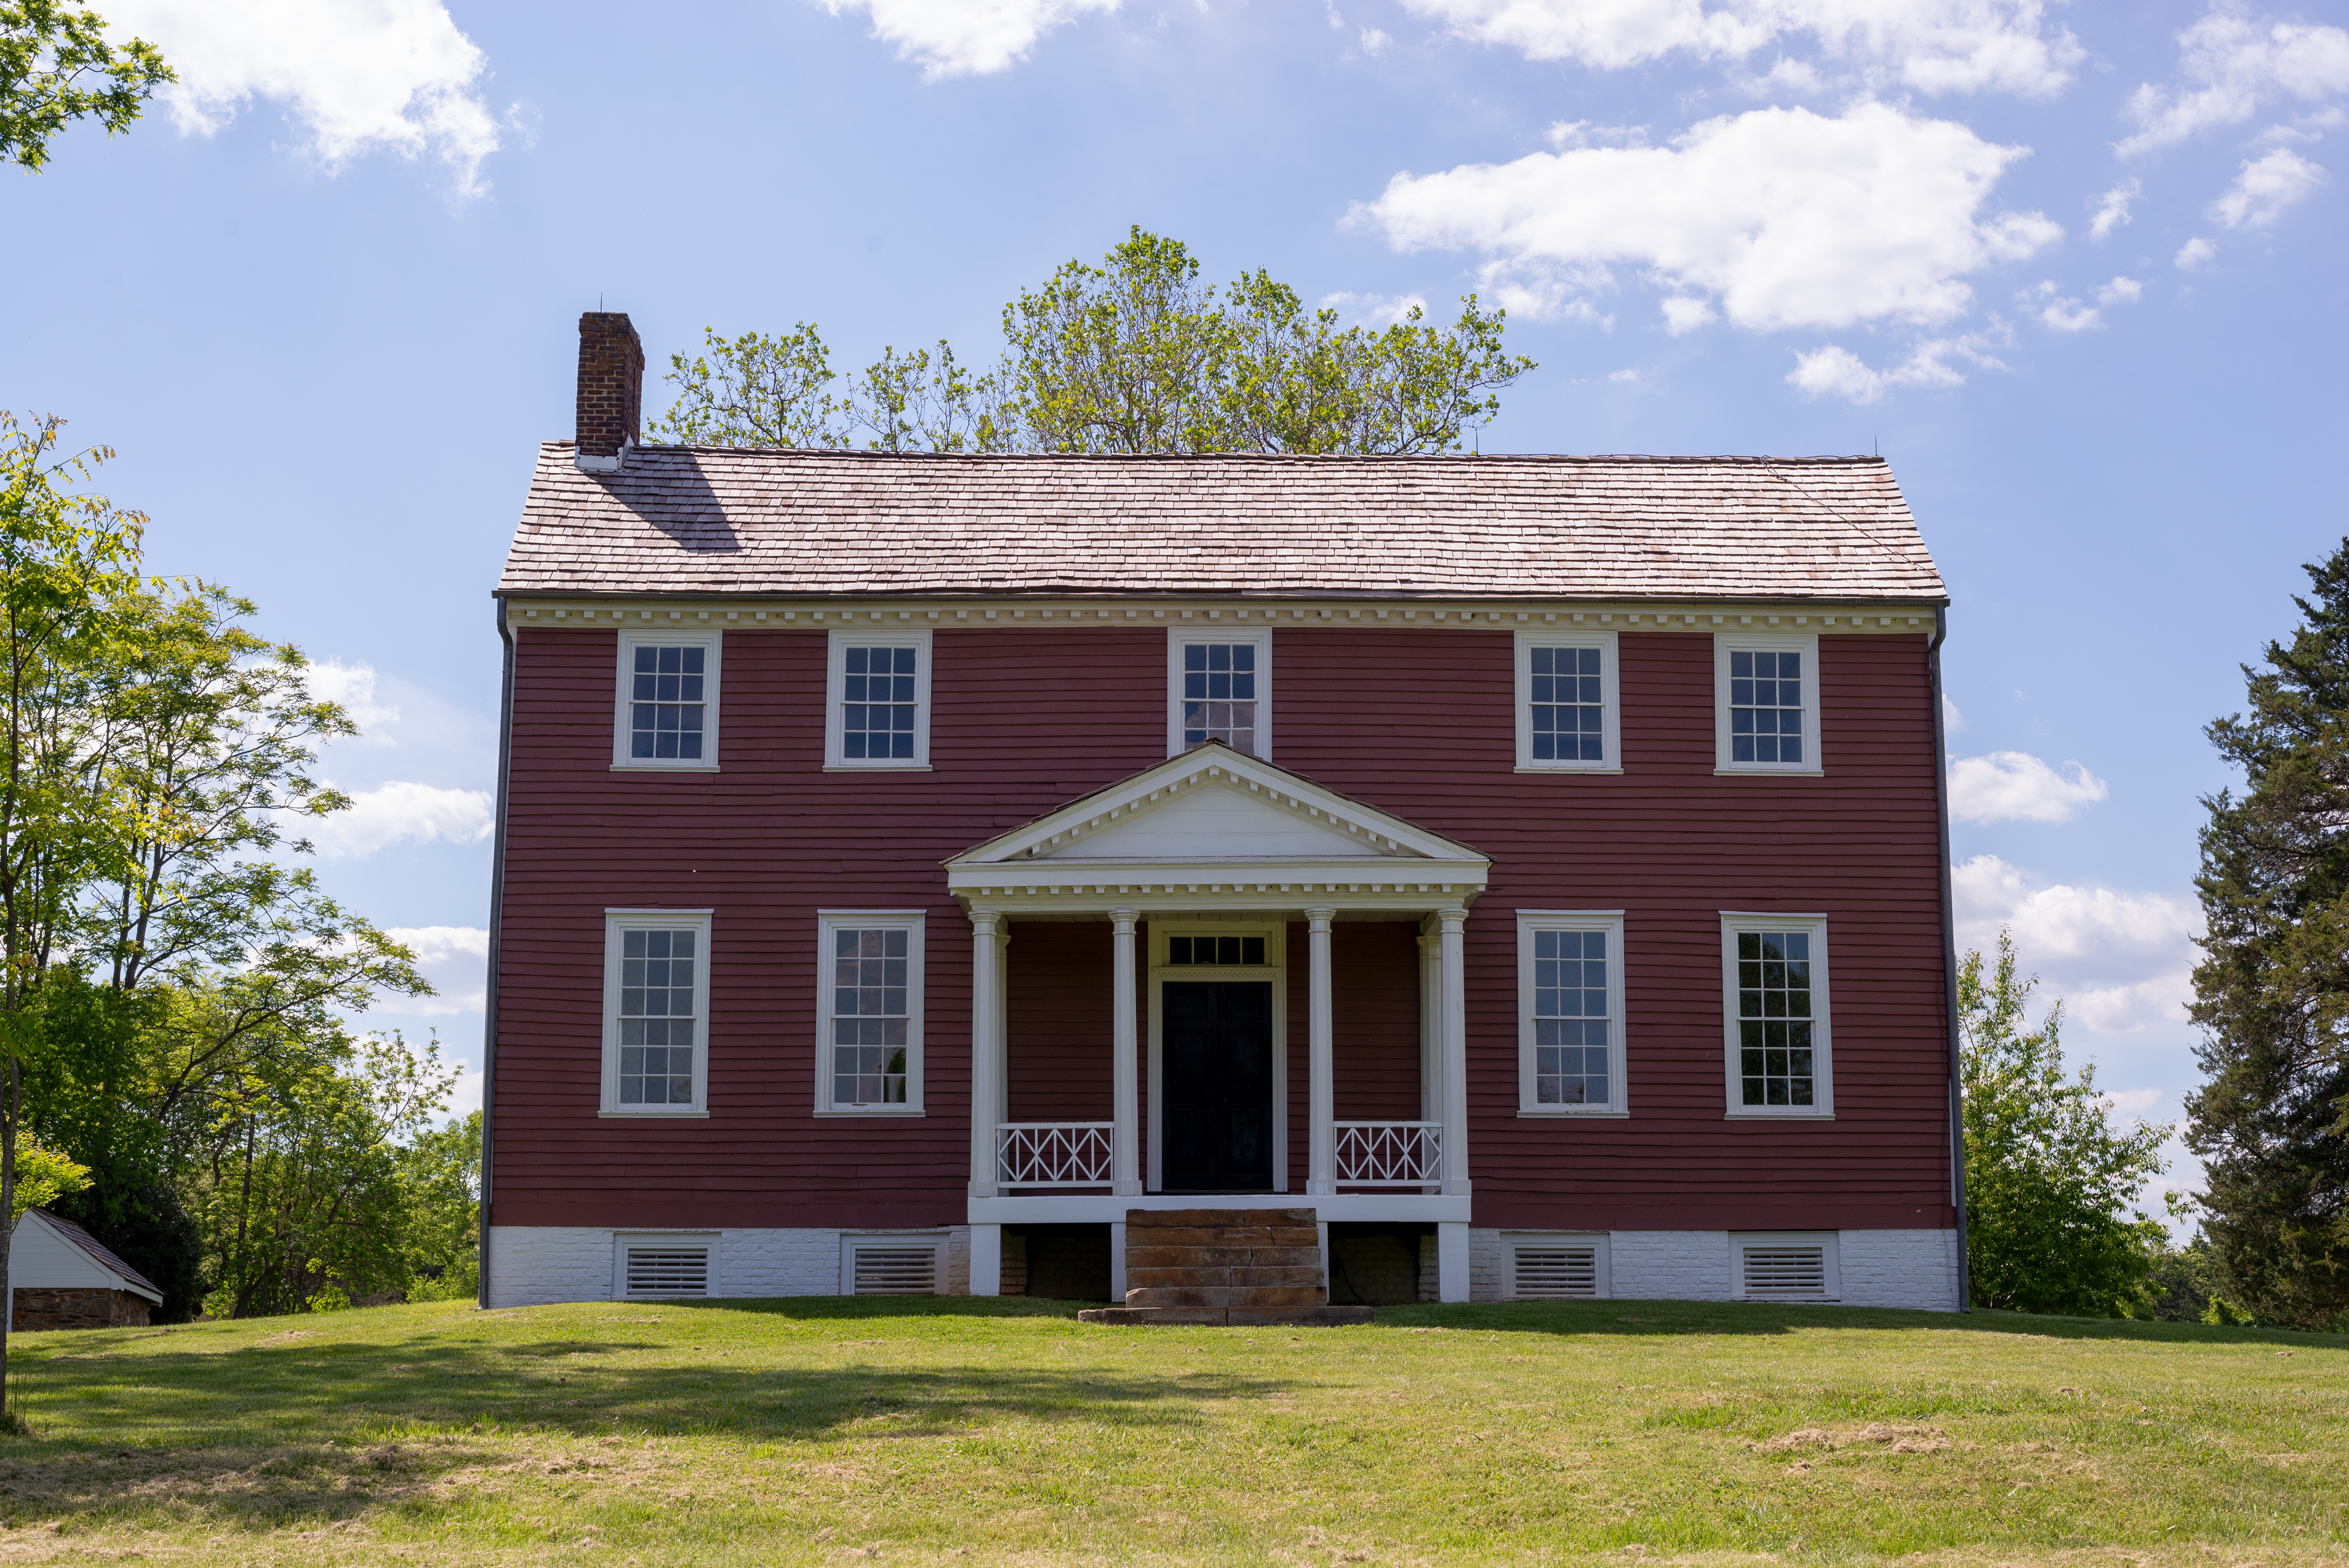 A two story red farm house with columned porch.